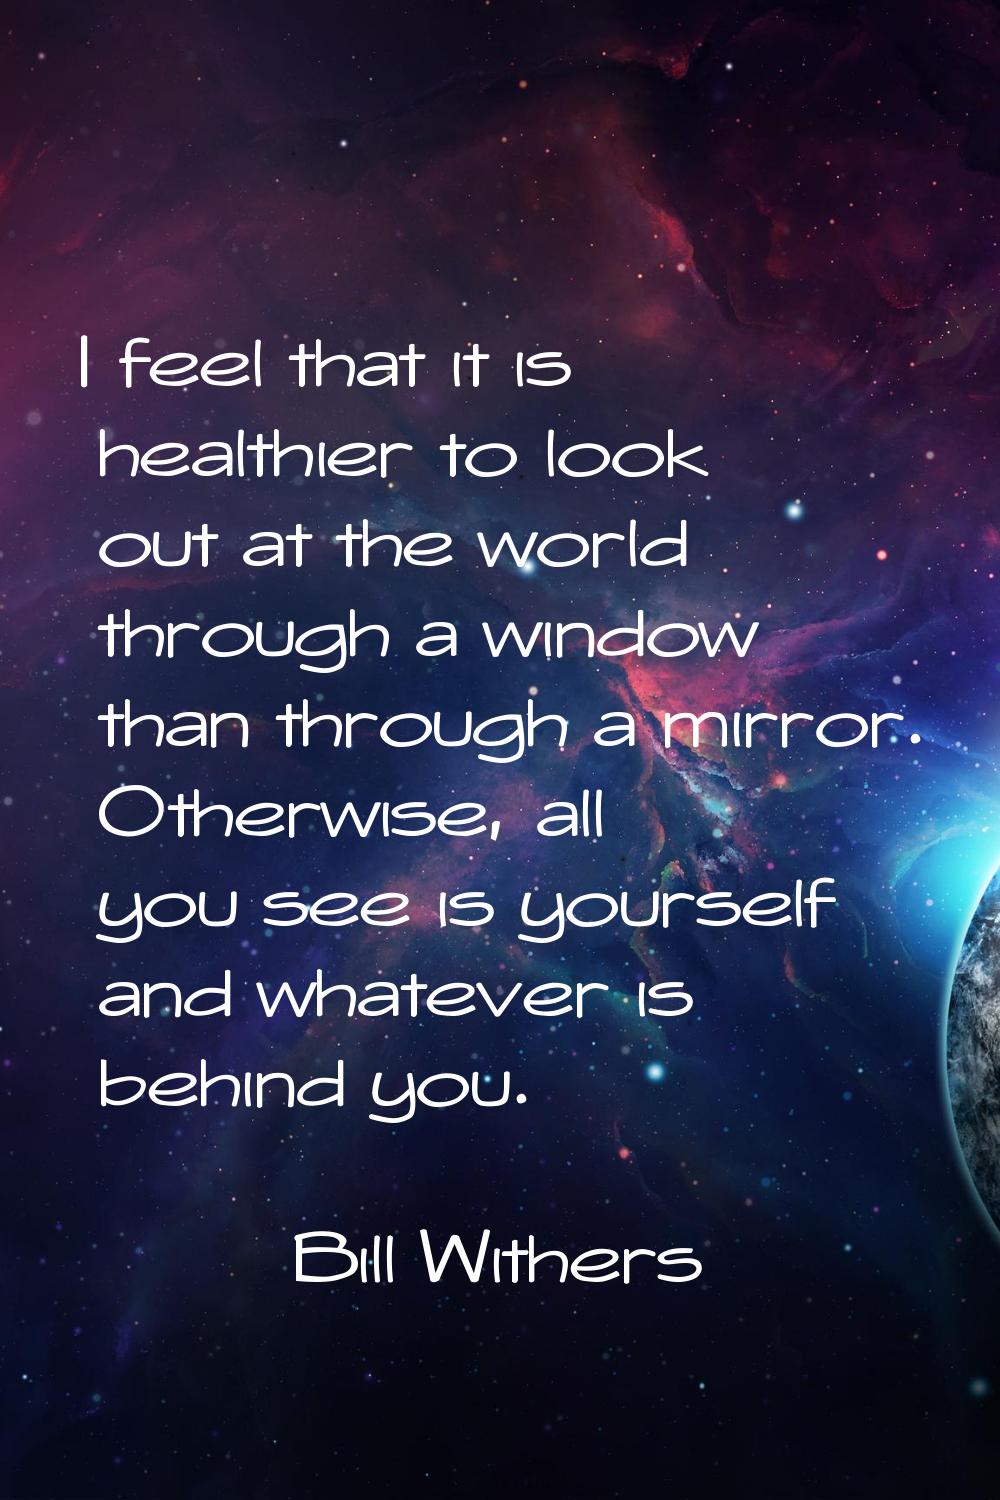 I feel that it is healthier to look out at the world through a window than through a mirror. Otherw